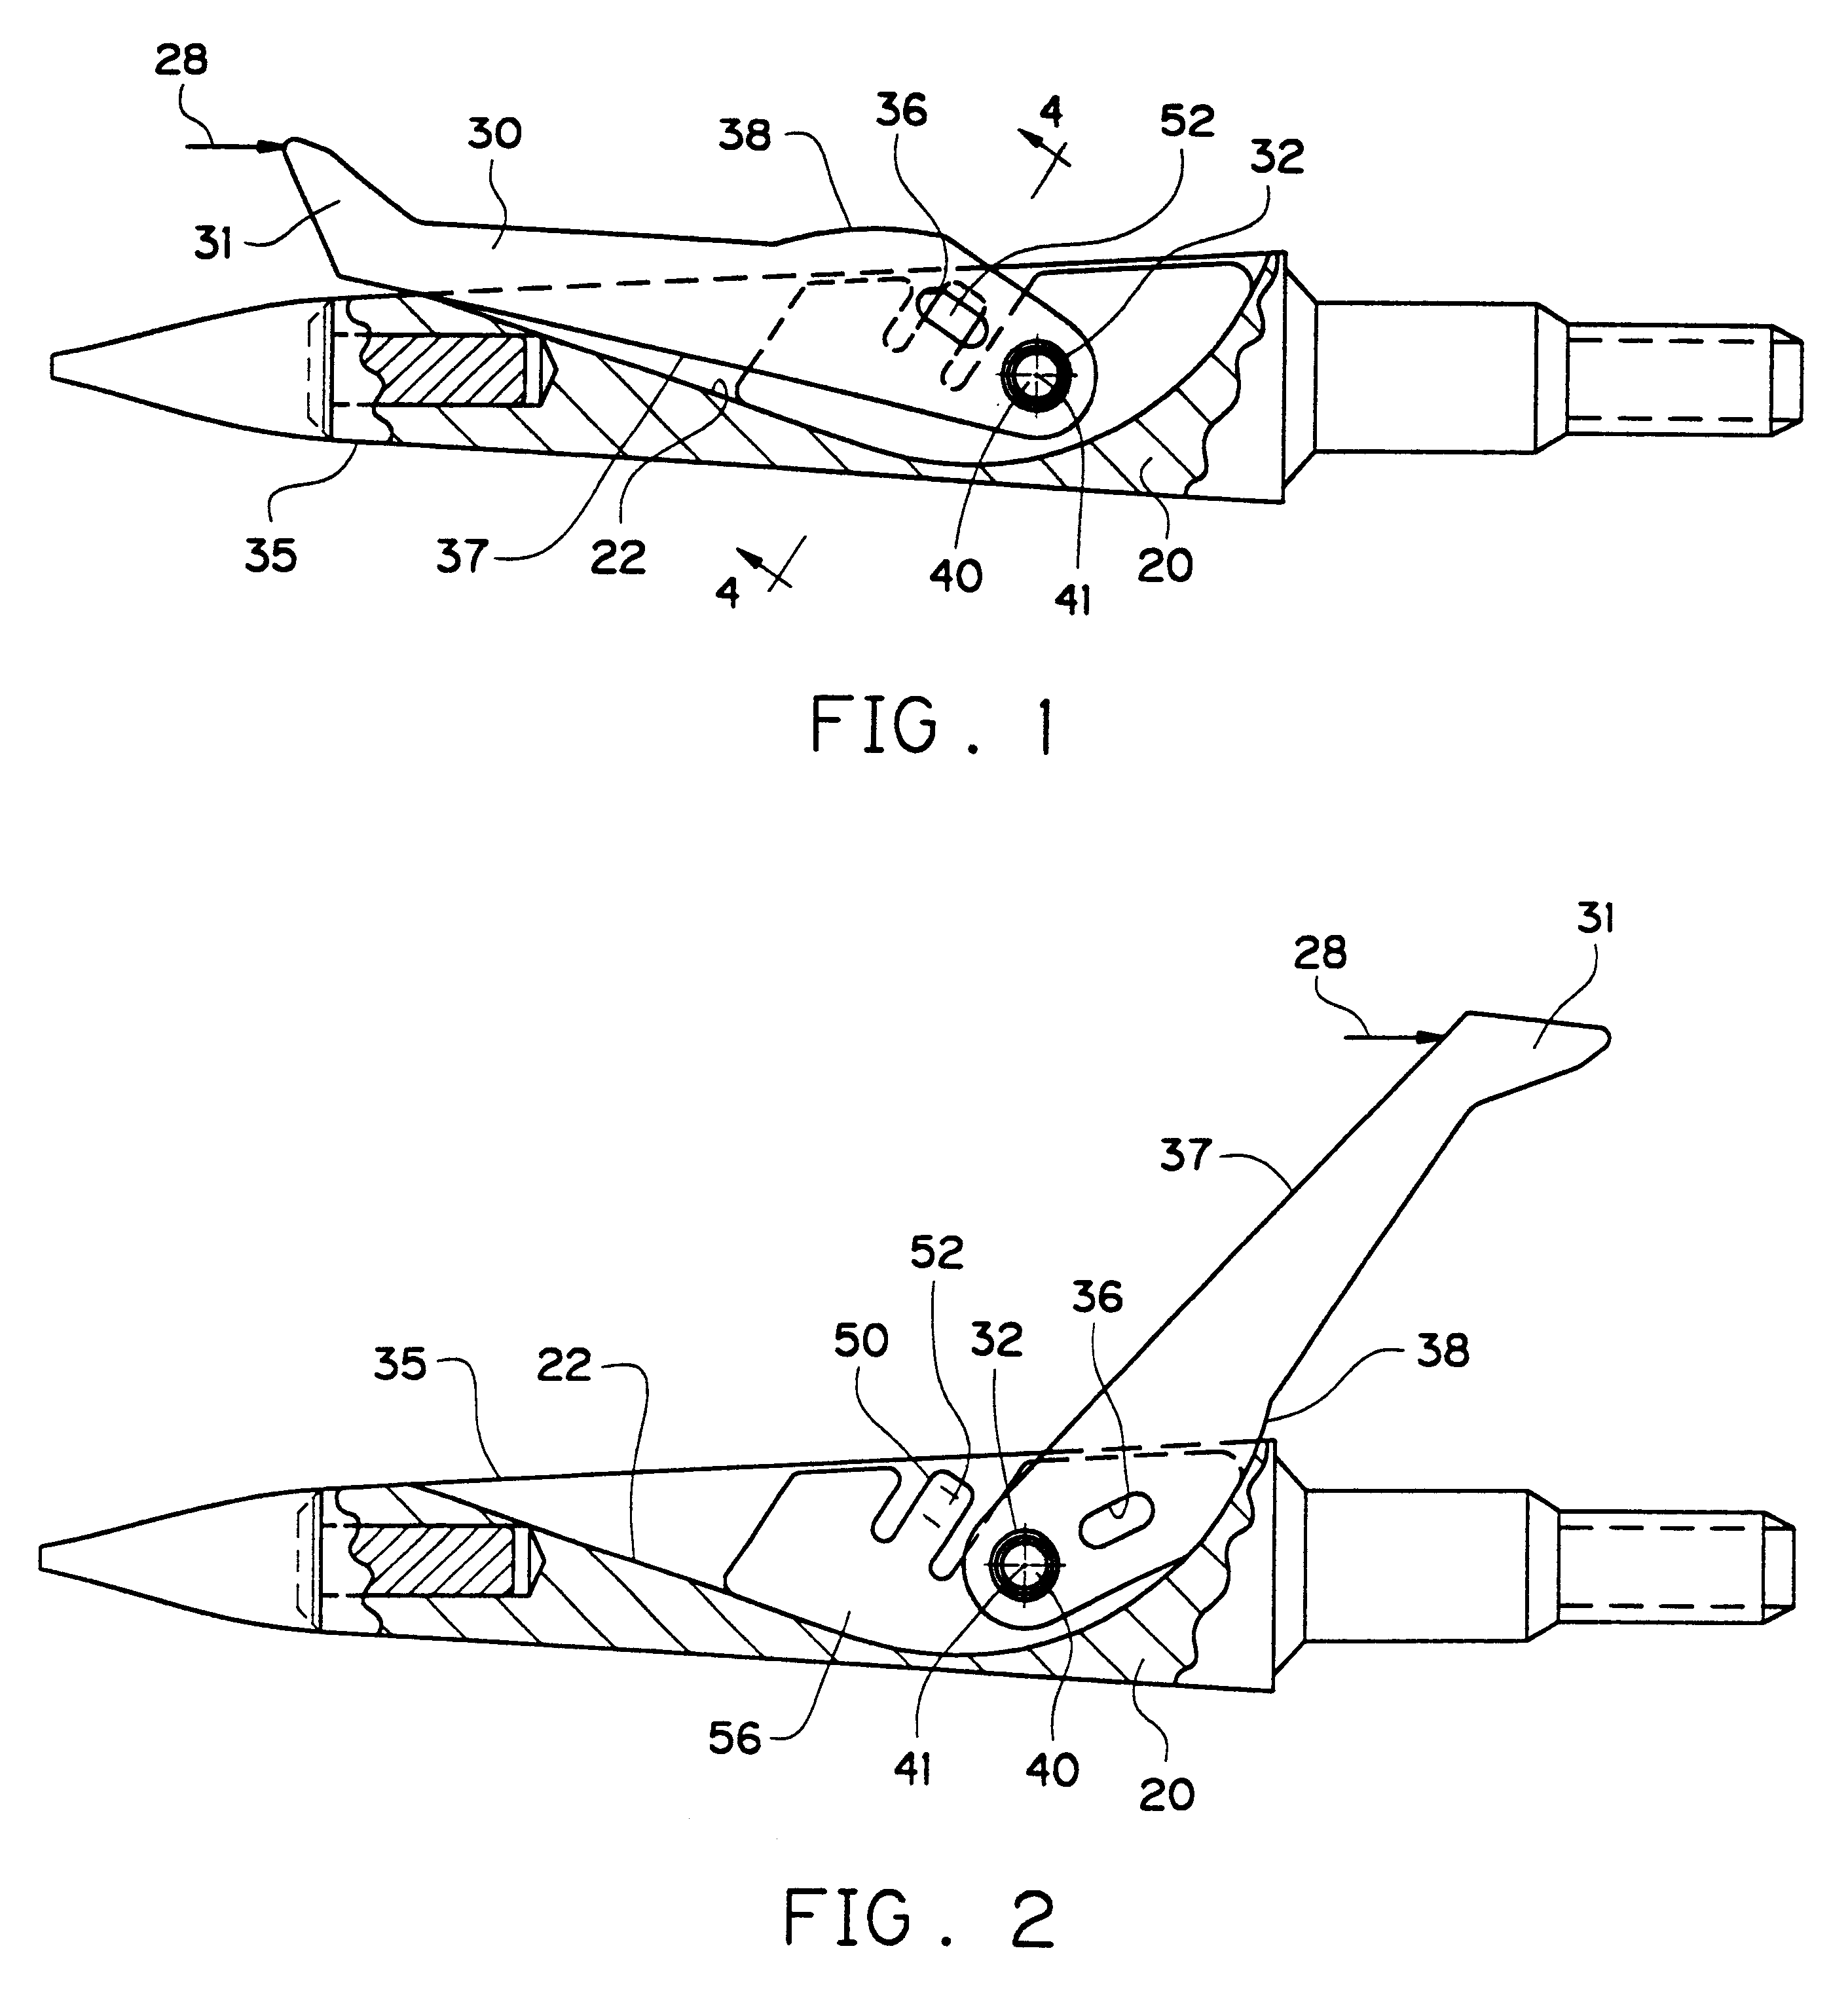 Arrowhead with interchangeable blades